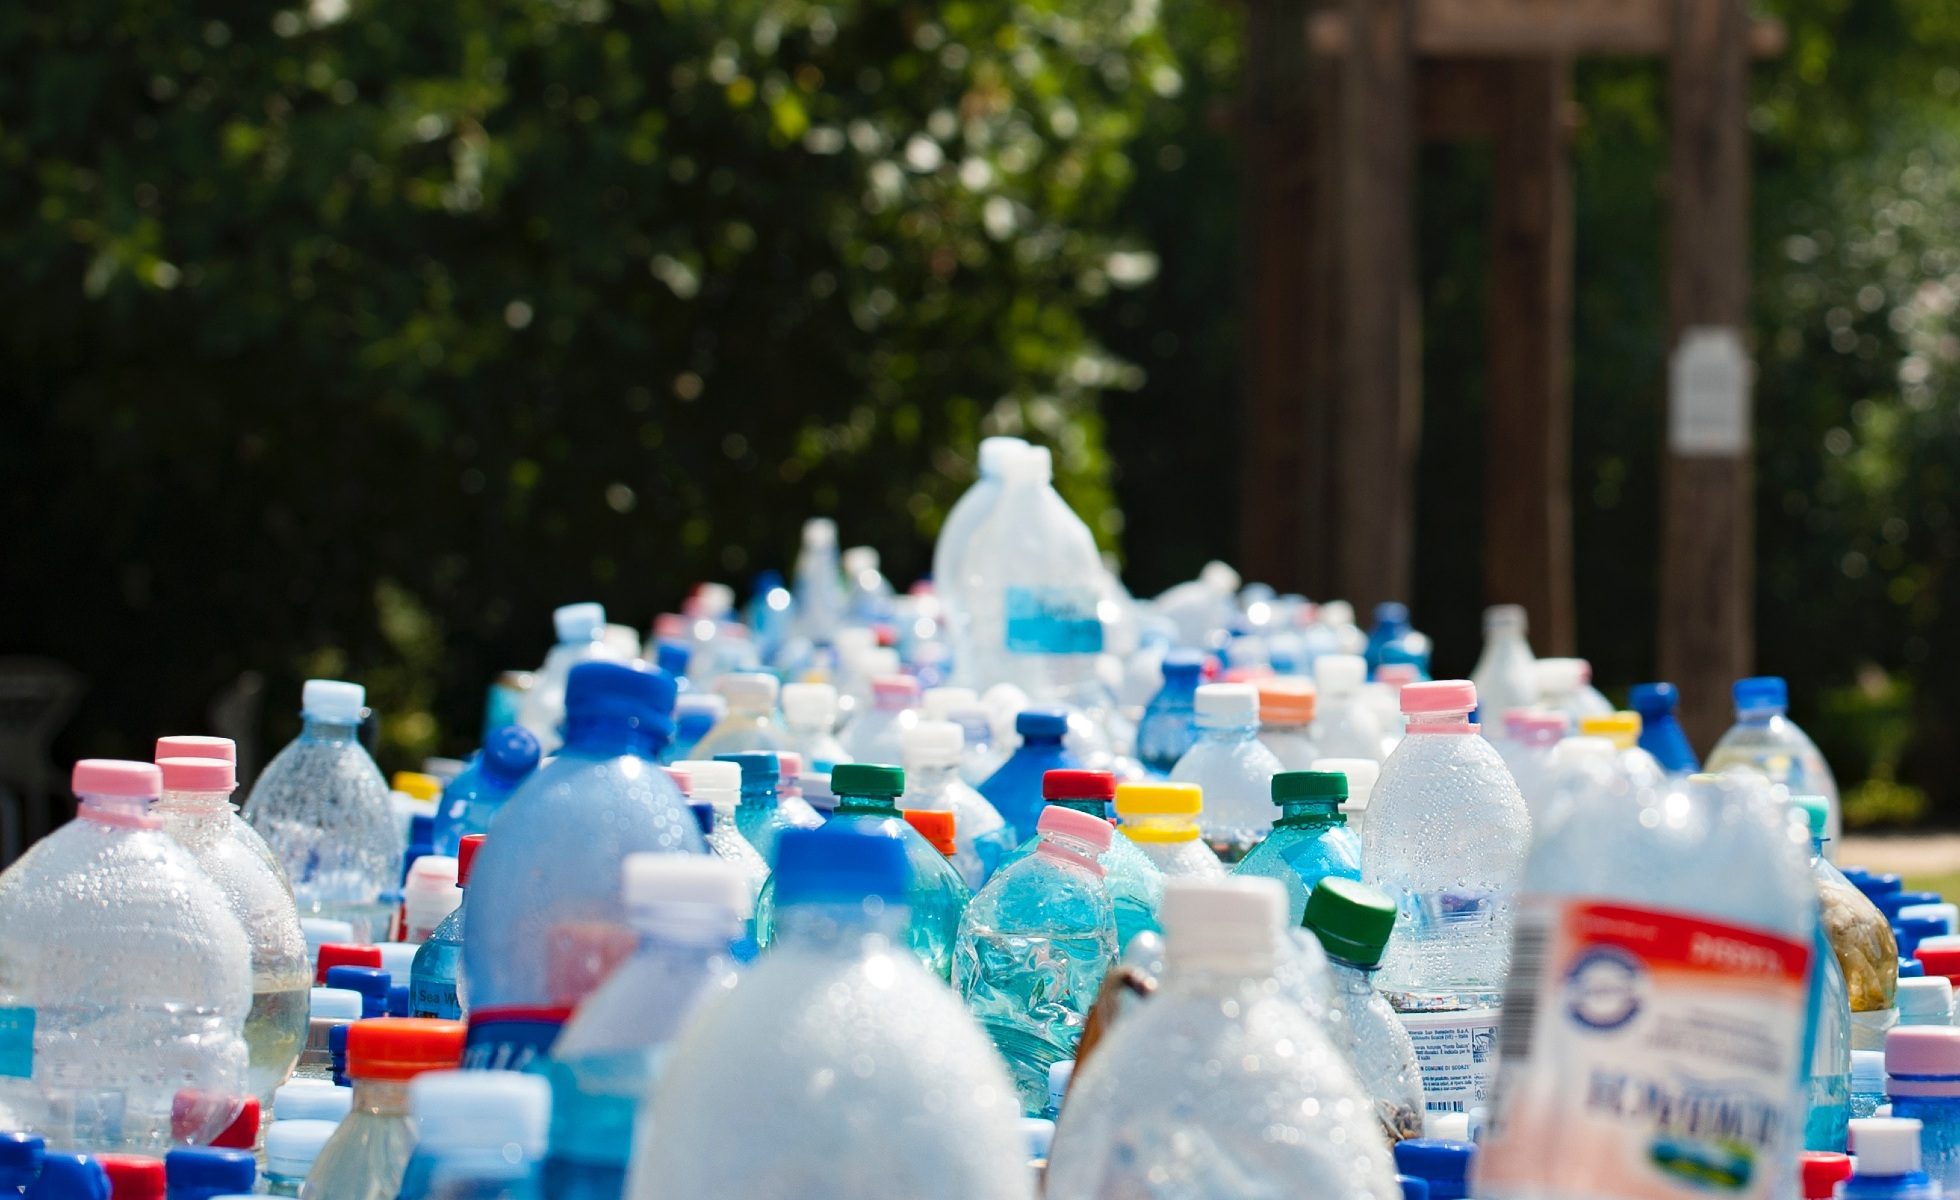 Canada's plastics ban should include beverage containers